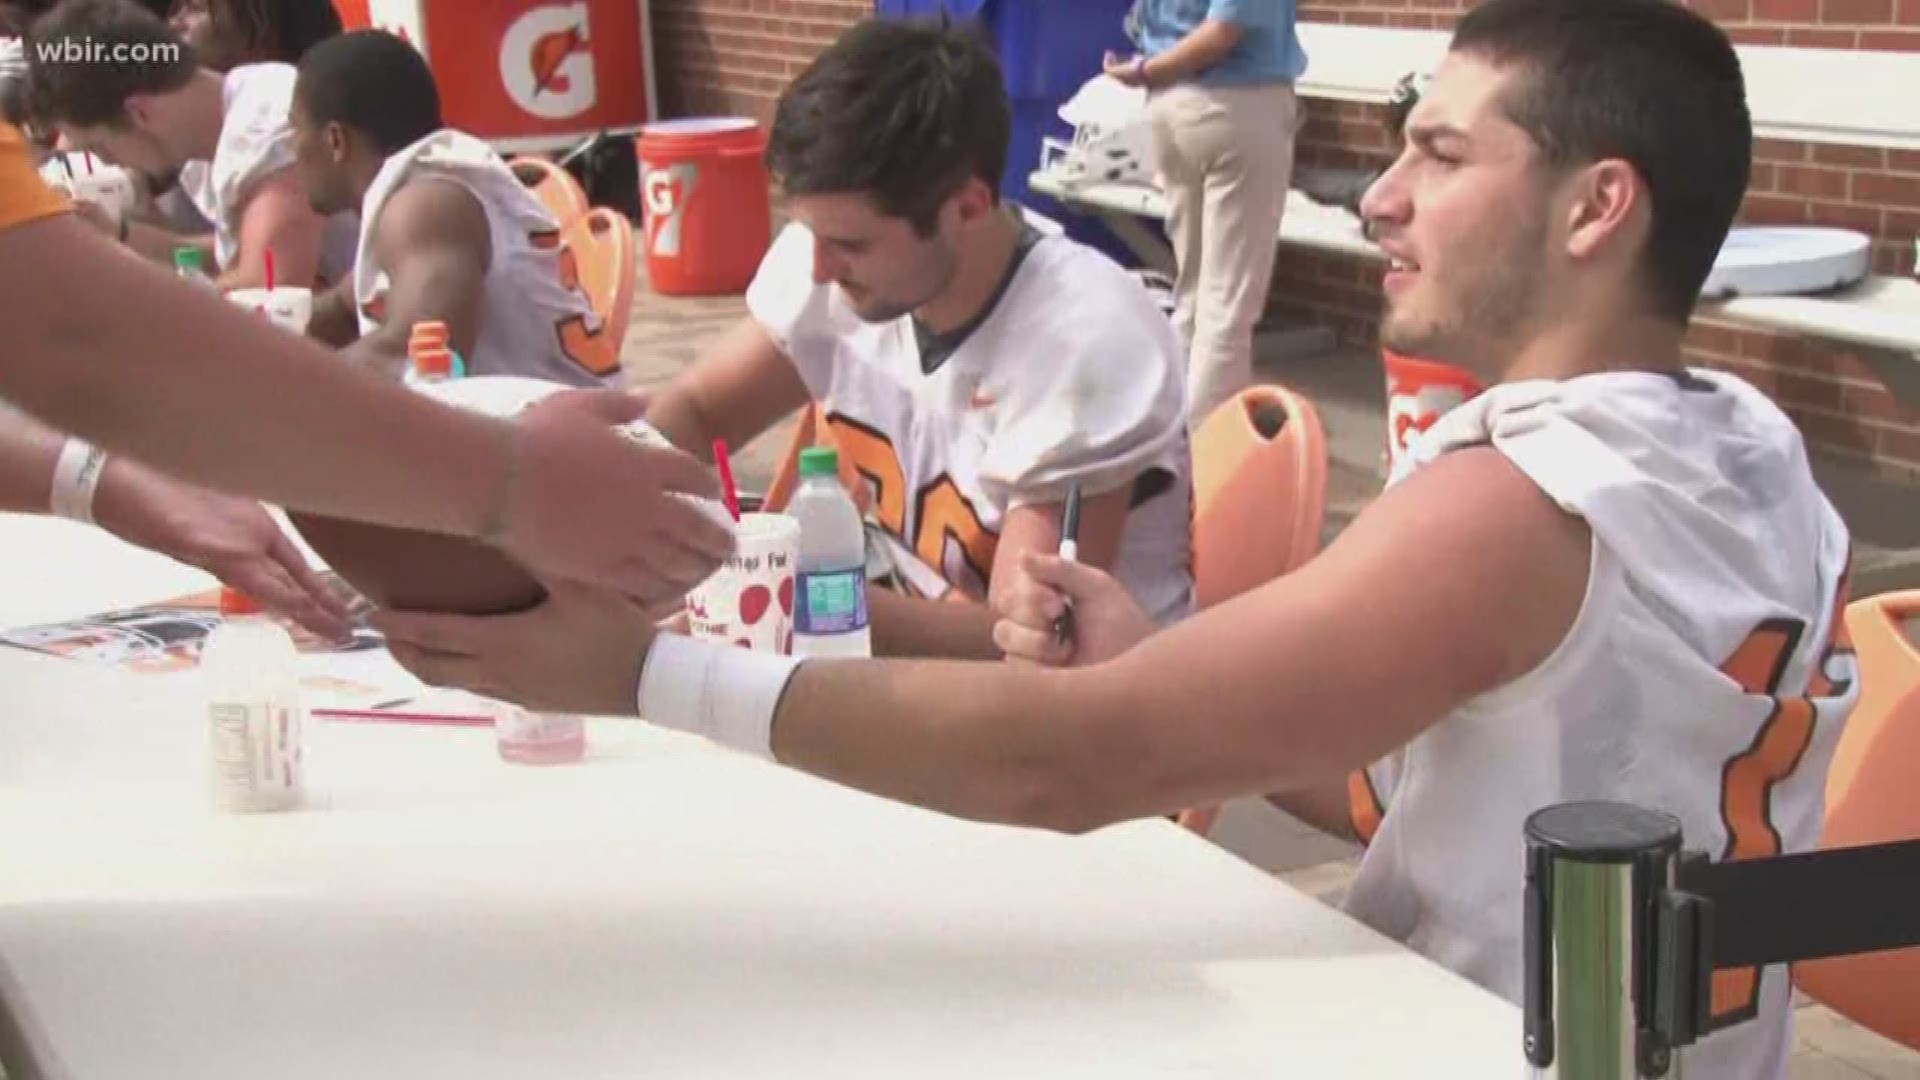 We're just weeks away from the start of football season, and Tennessee fans got the chance to watch practice and get some autographs at Fan Day.